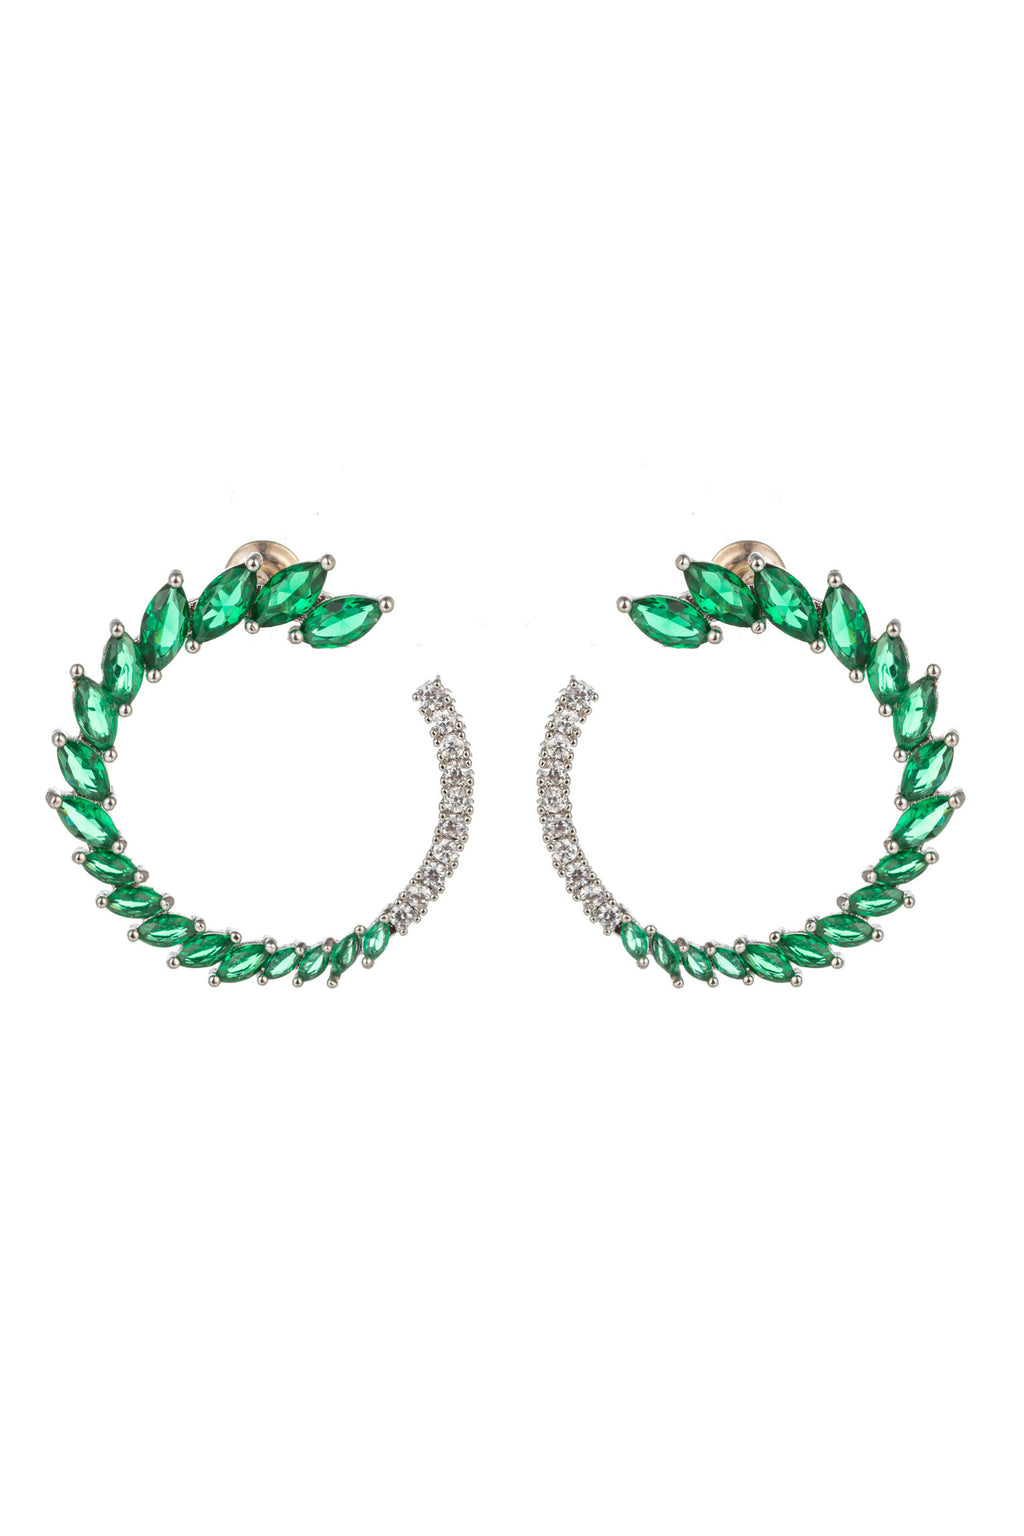 Roman green dangle earrings studded with CZ crystals.